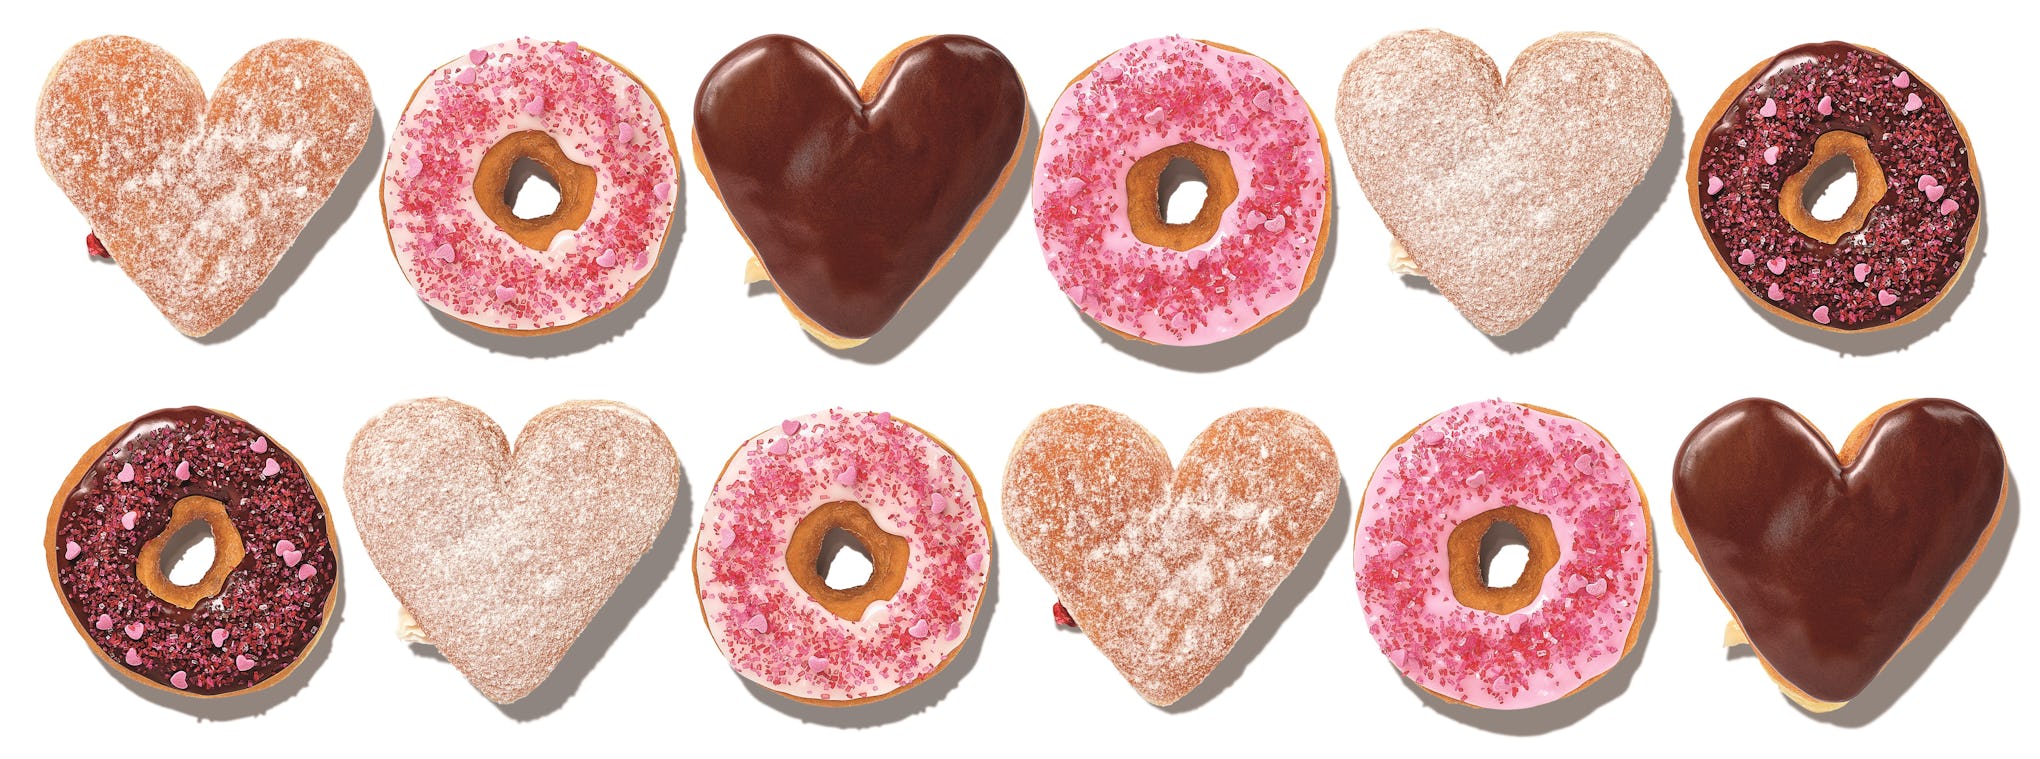 Dunkin’s February 2019 Deal Is A Discount On Your Favorite Mini Donuts